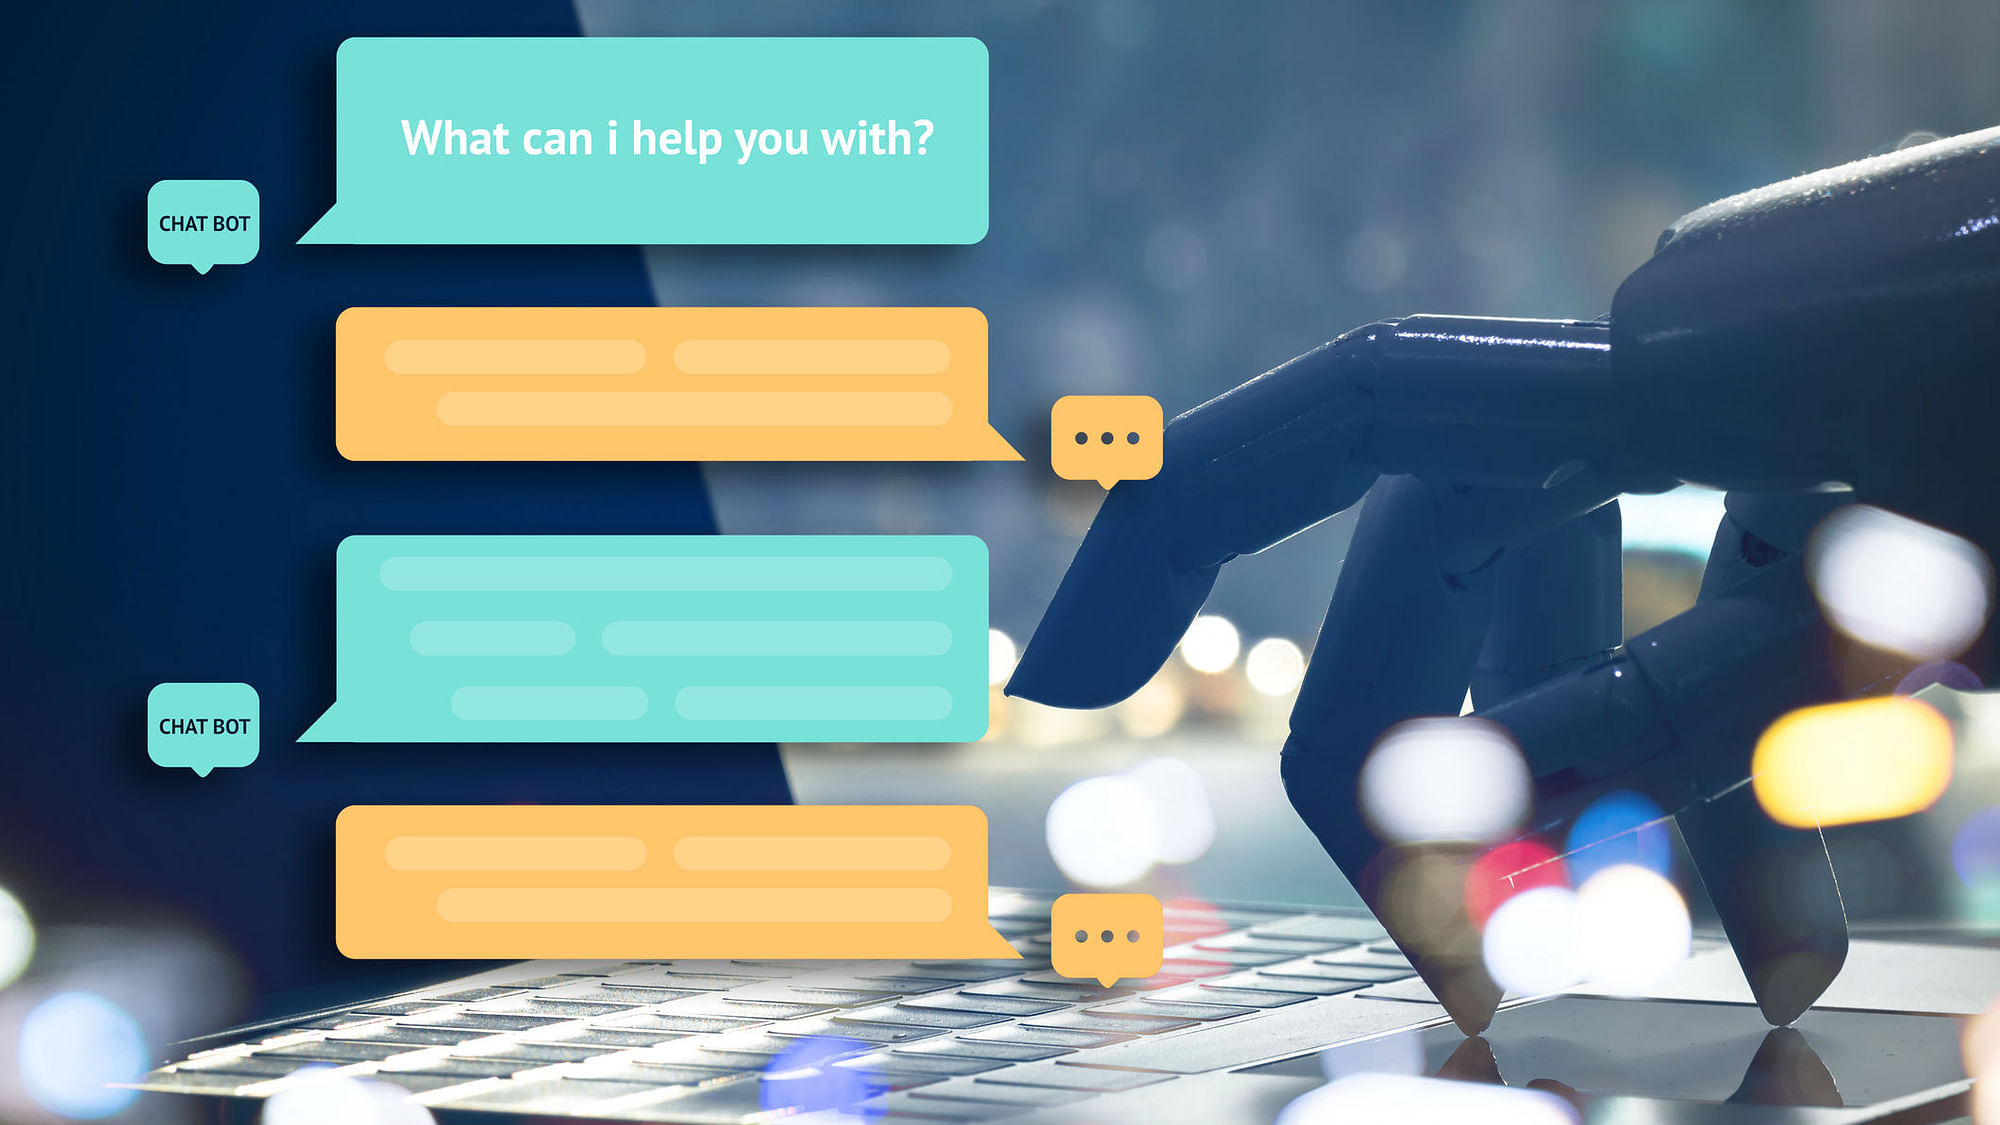 Chatbots learn from data to answer a standard set of questions from humans.